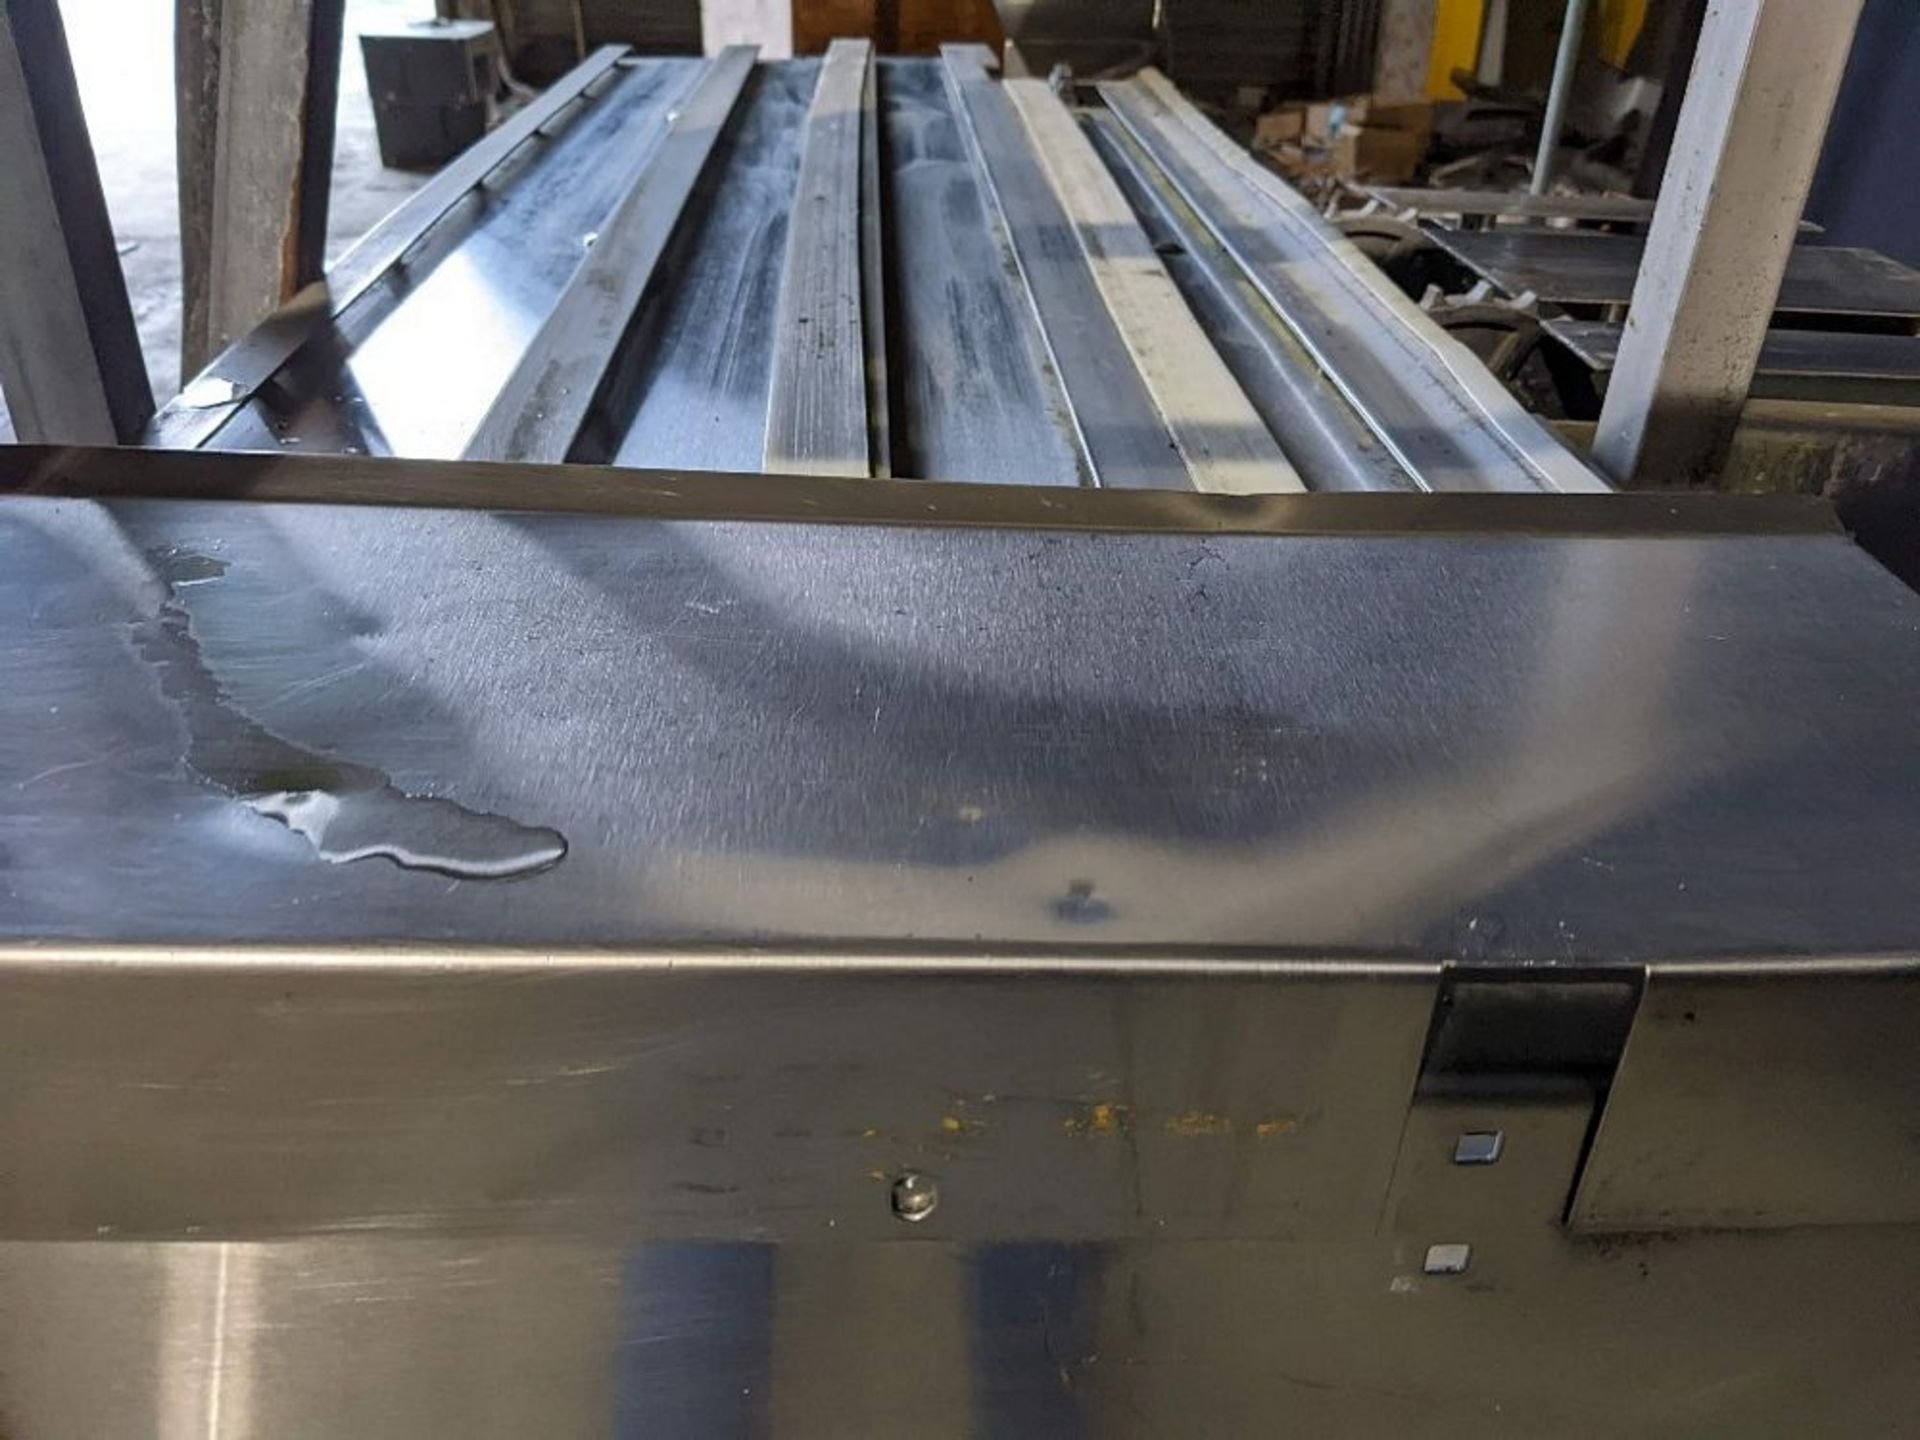 Qty (1) All Stainless Steel Dynamic Transfer Conveyor - Including Drive for 18" W Matt Top Chain - - Image 4 of 7